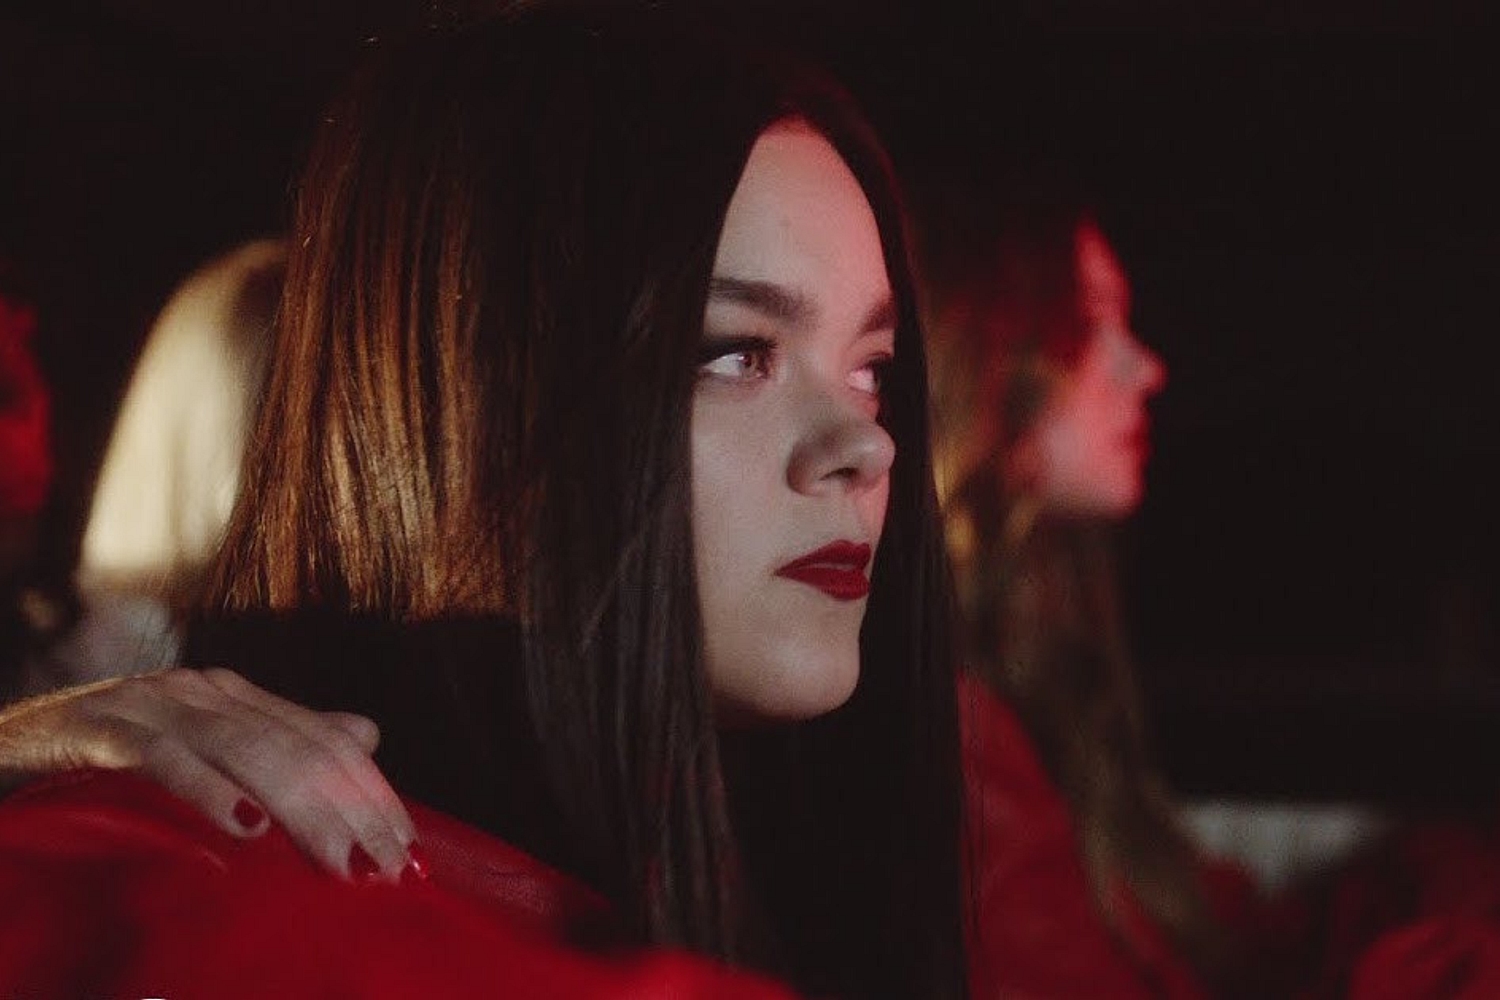 First Aid Kit announce 'Tender Offerings' EP and share 'Rebel Heart' video